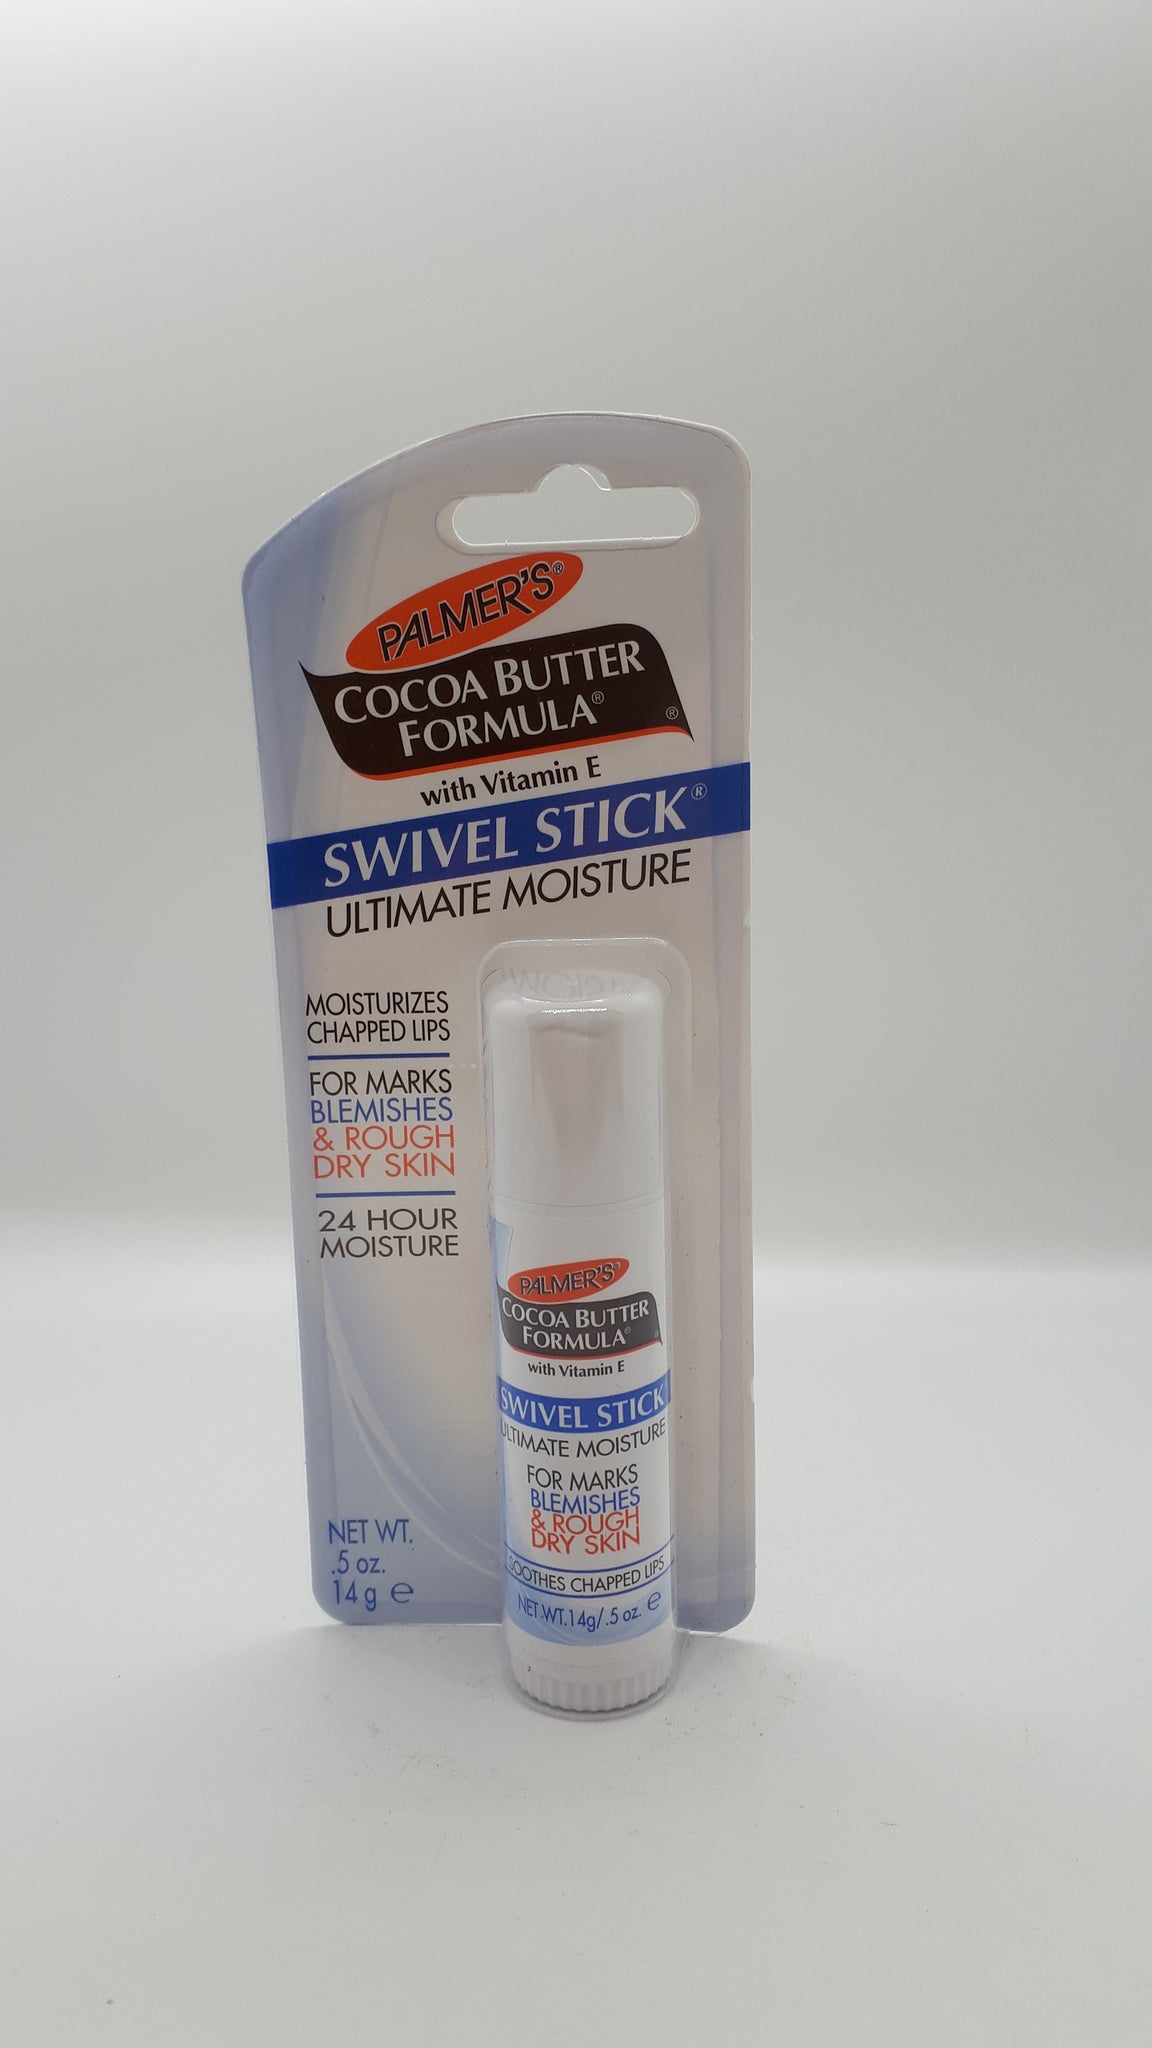 PALMER'S COCOA BUTTER FORMULA PRODUCTS Swivel Stick